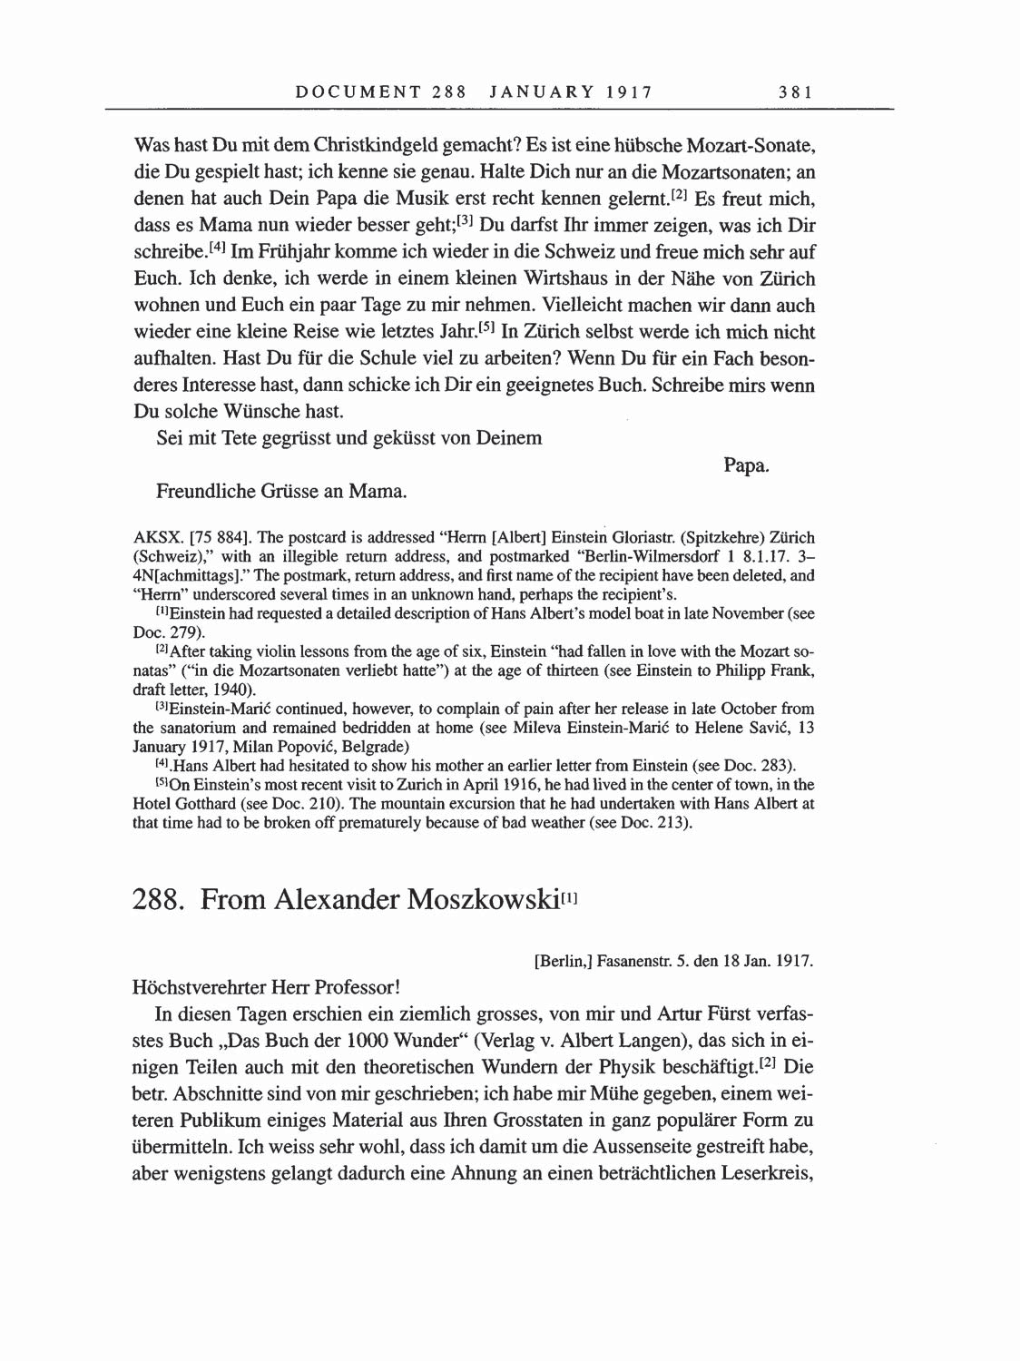 Volume 8, Part A: The Berlin Years: Correspondence 1914-1917 page 381